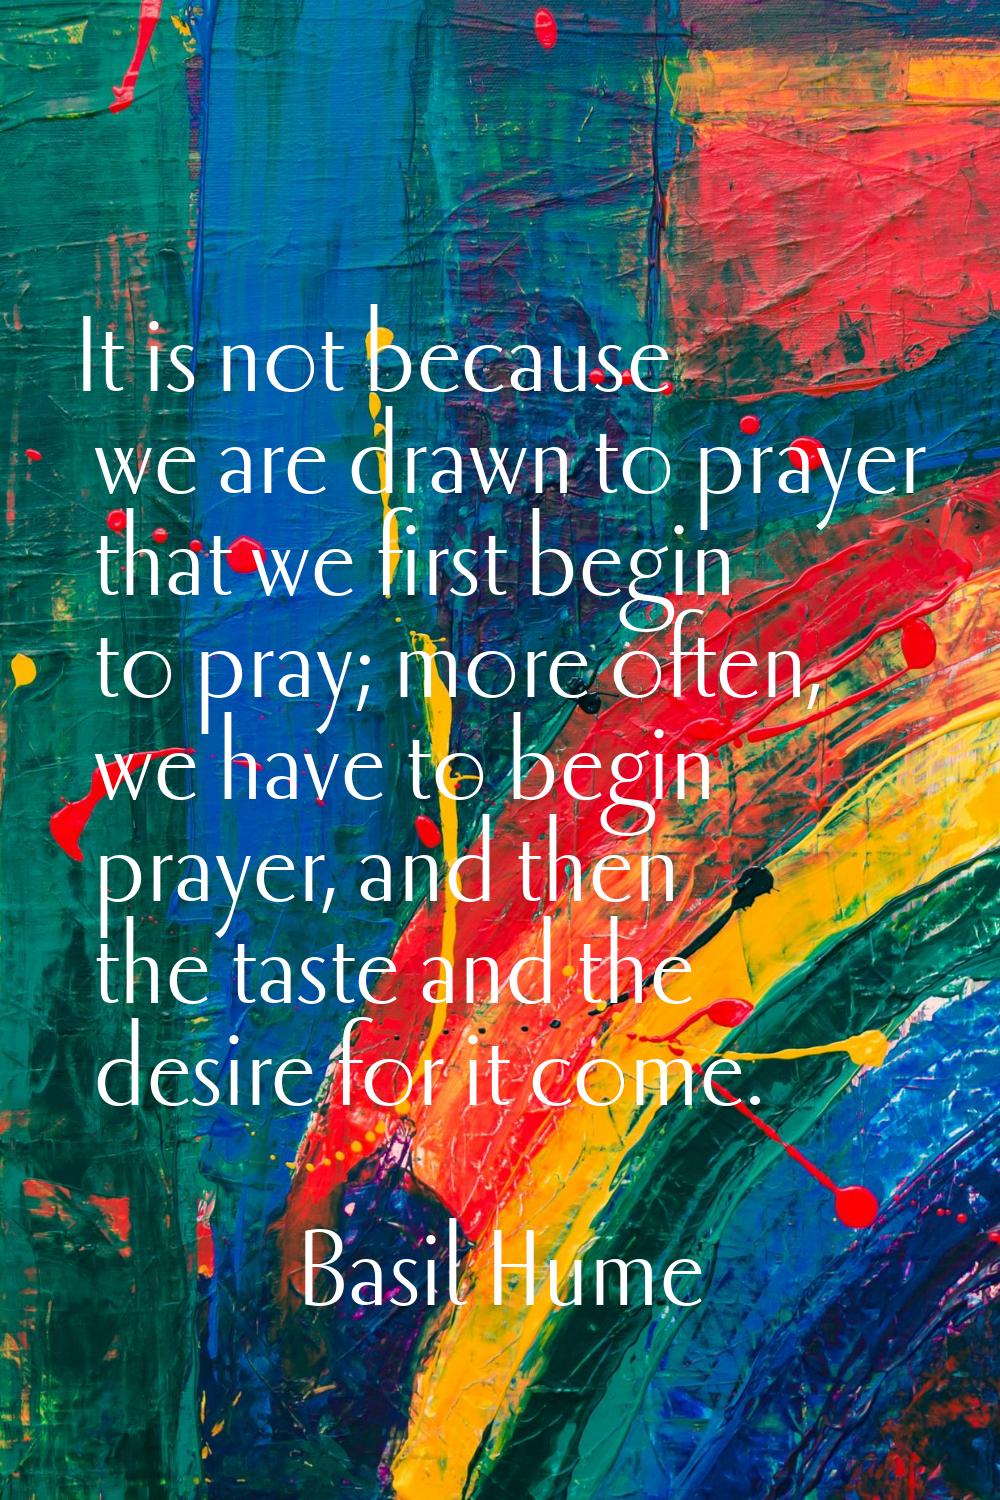 It is not because we are drawn to prayer that we first begin to pray; more often, we have to begin 